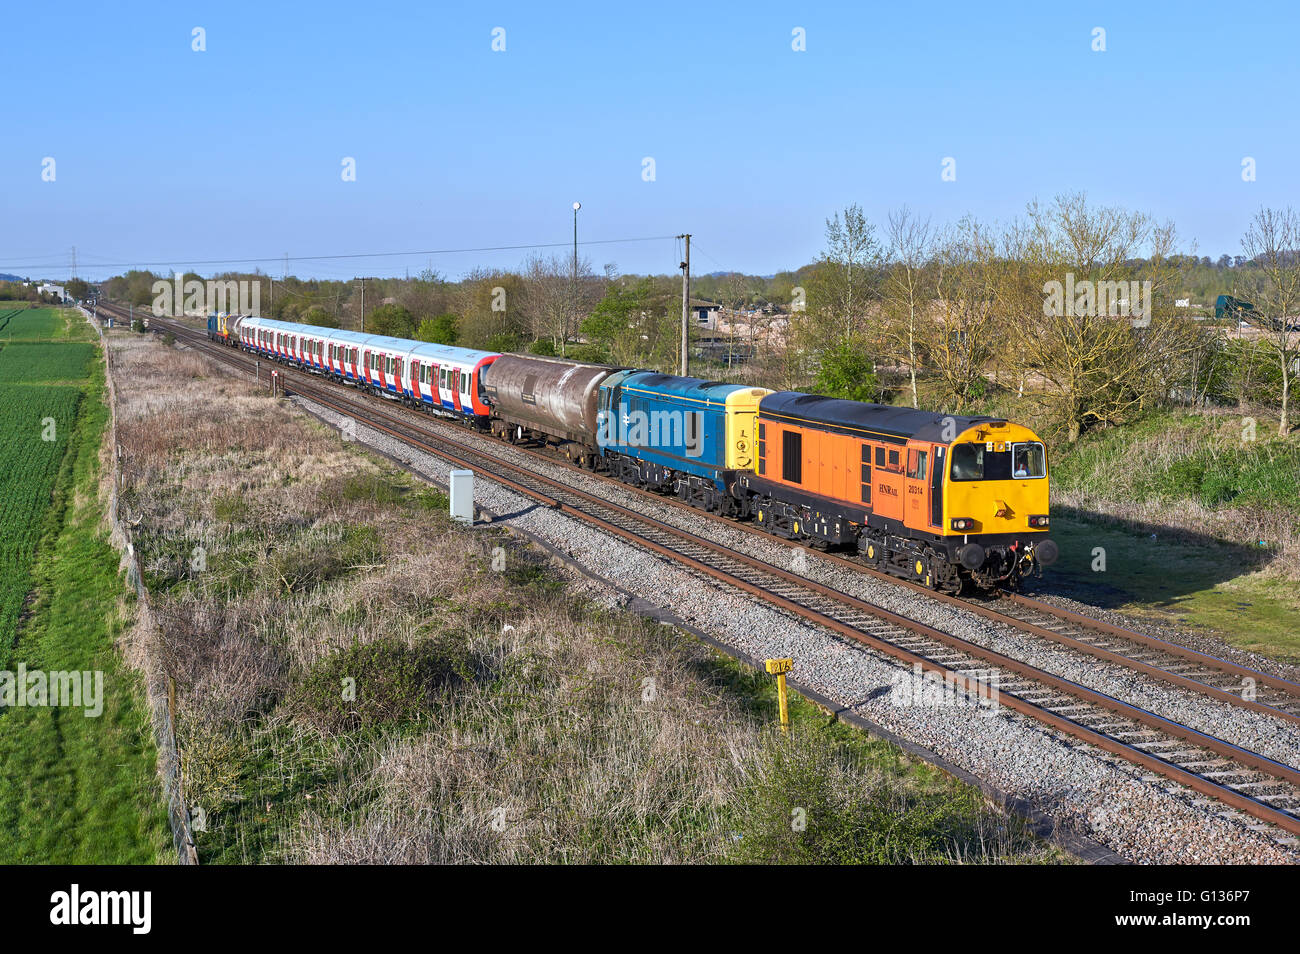 20314 & 20096 head 7X09 11:47 Old Dalby to West Ruislip LUL stock move through Catholm on 20th April 2016. Stock Photo